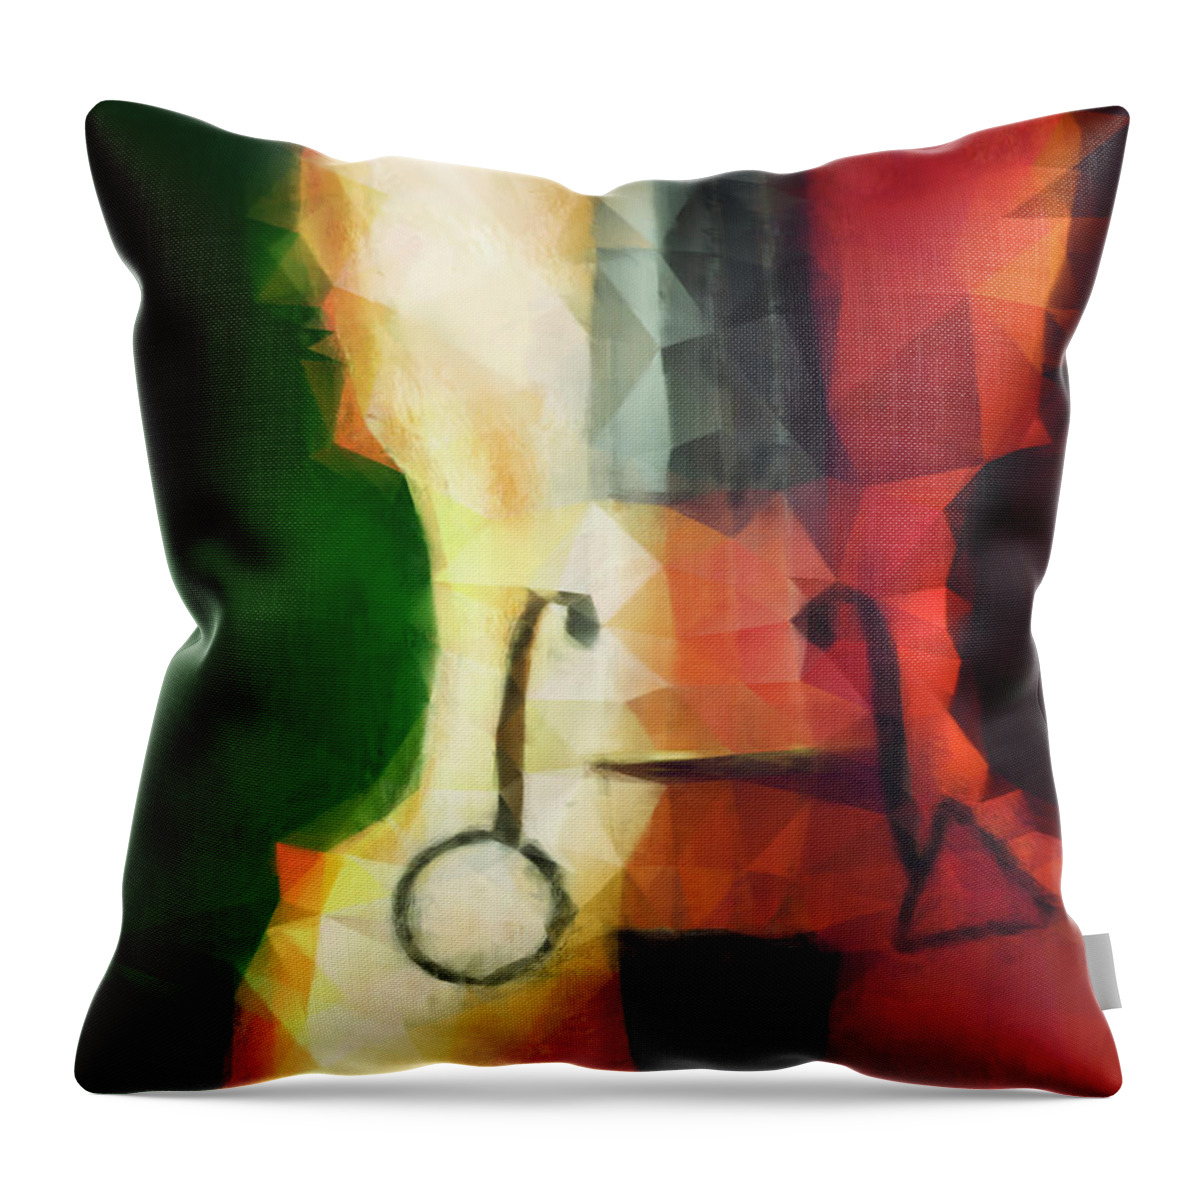 Muse Throw Pillow featuring the painting Muse by Vart Studio